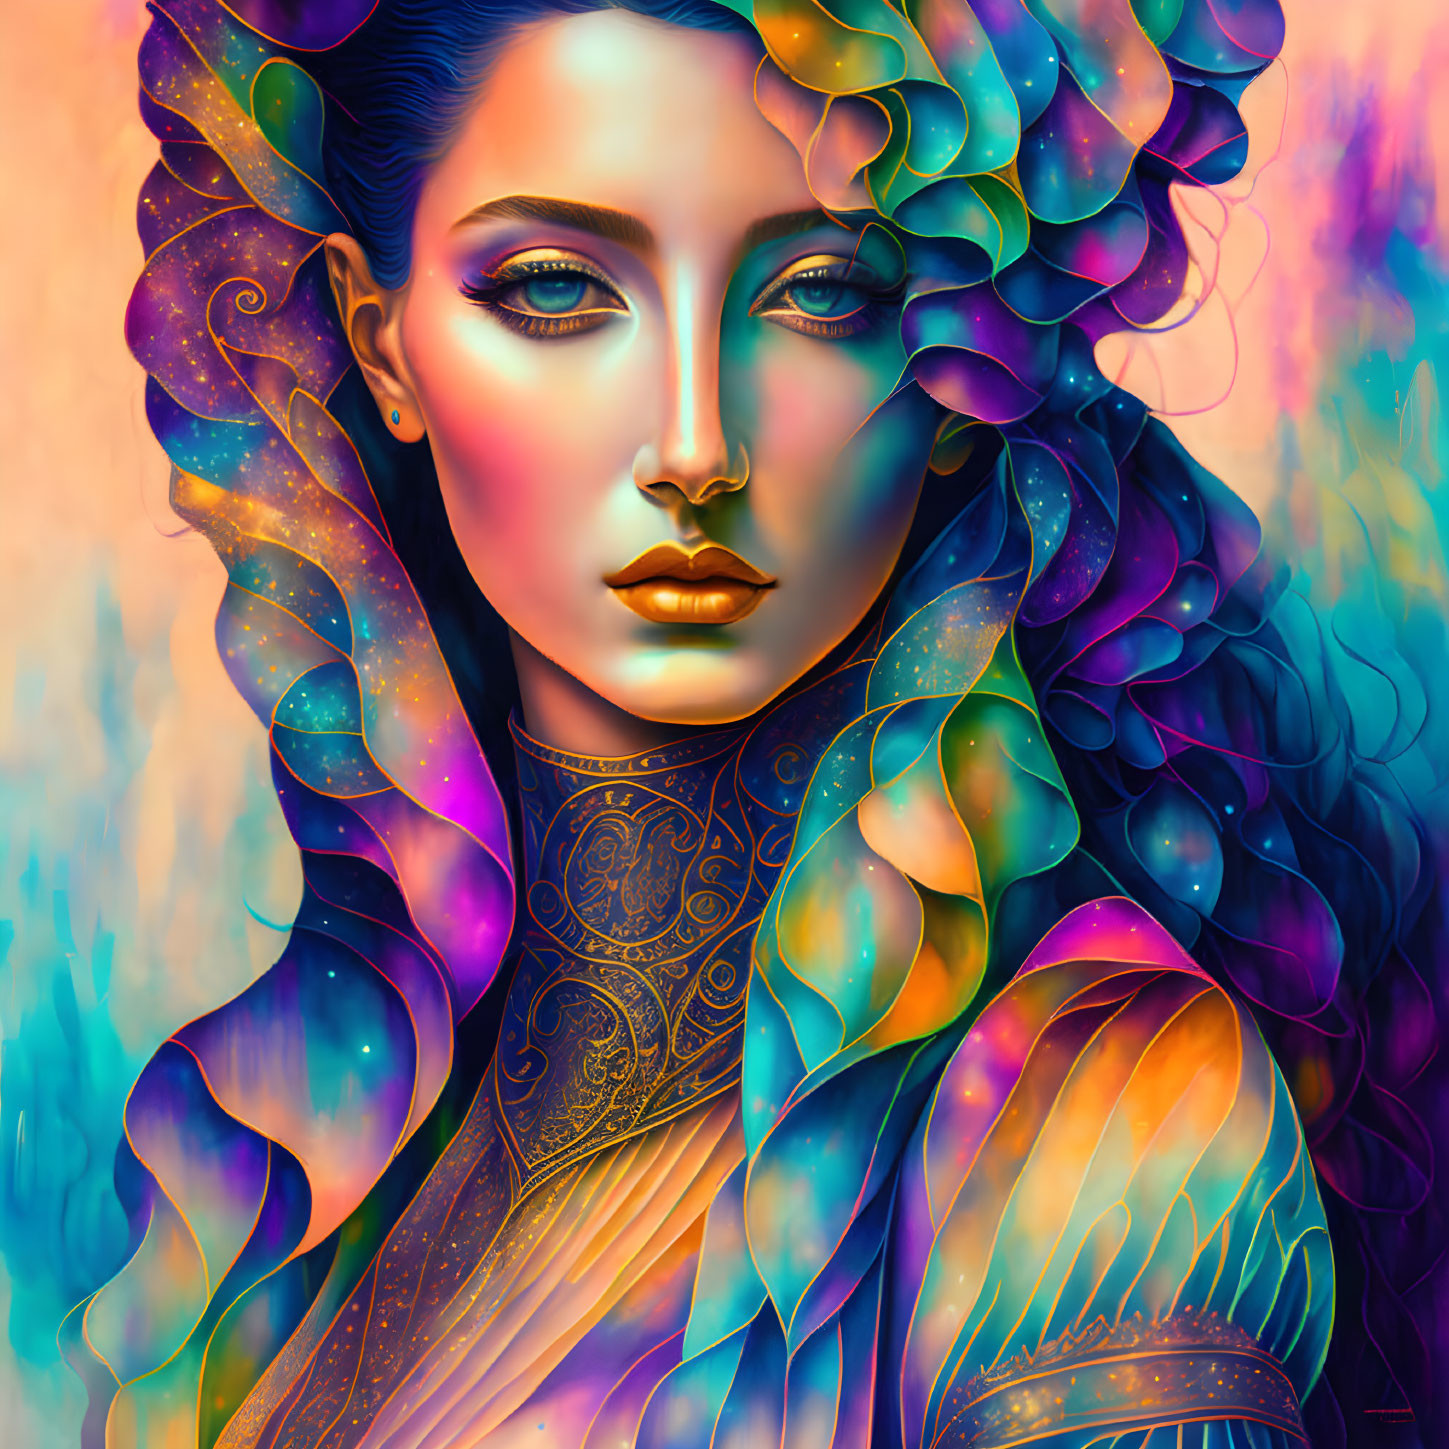 Colorful digital artwork: Woman with wavy hair and body art on cosmic background